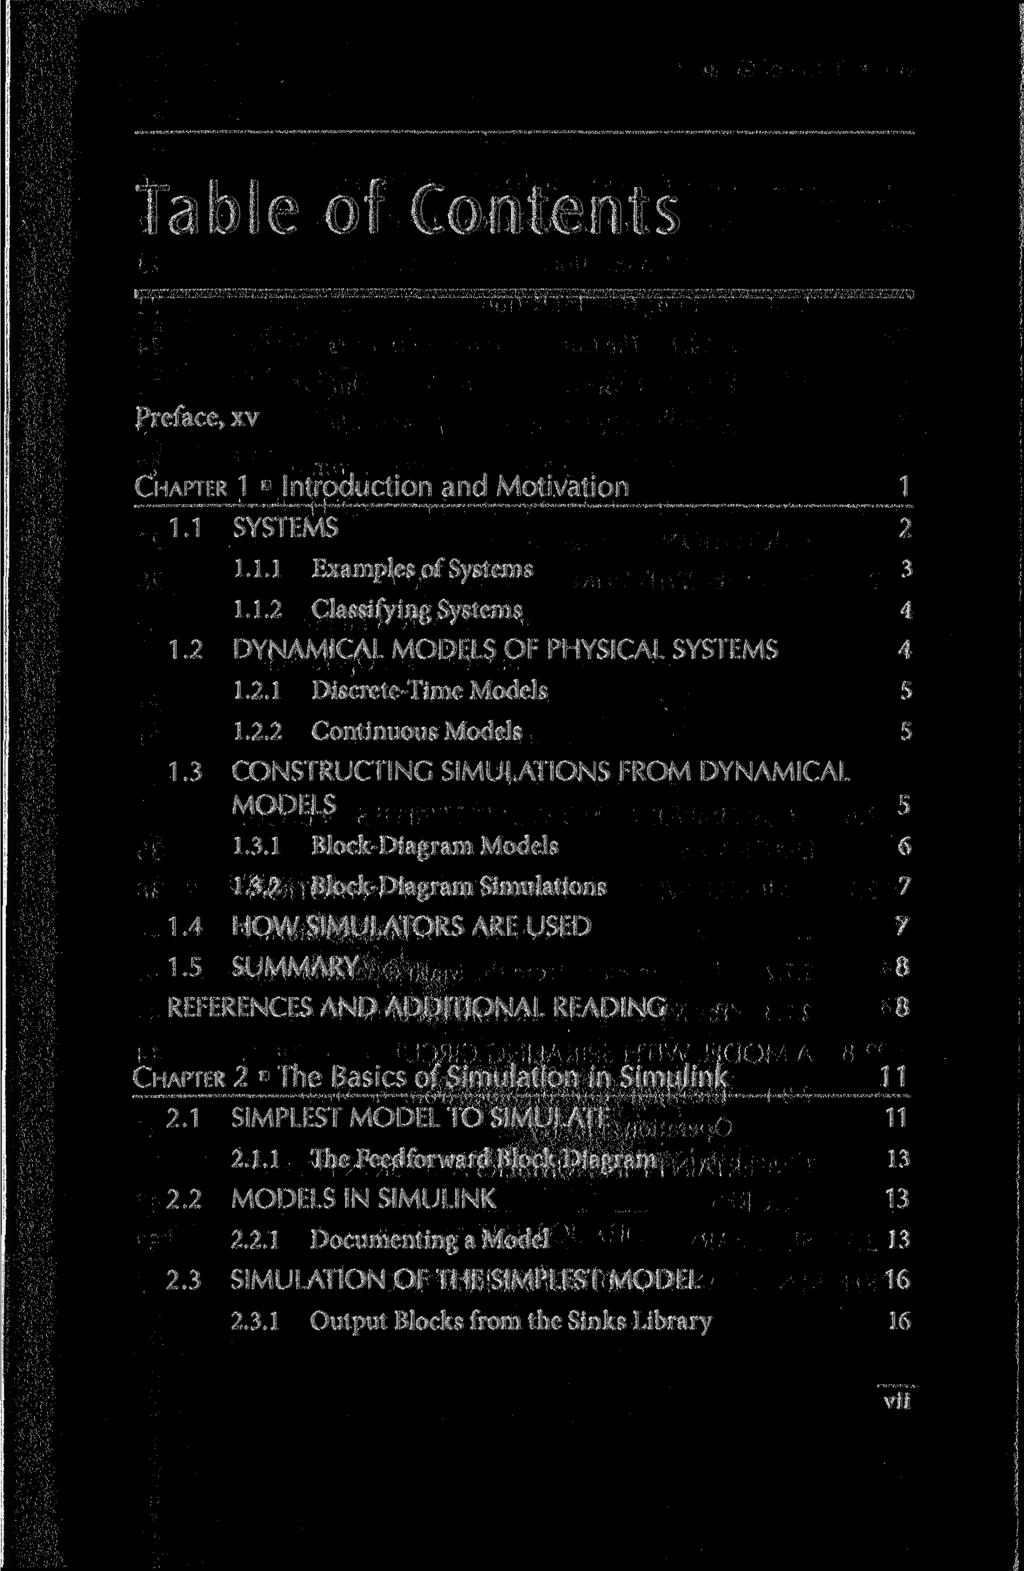 Table of Contents Preface, xv CHAPTER 1 Introduction and Motivation 1 1.1 SYSTEMS 2 1.1.1 Examples of Systems 3 1.1.2 Classifying Systems 4 1.2 DYNAMICAL MODELS OF PHYSICAL SYSTEMS 4 1.2.1 Discrete-Time Models 5 1.